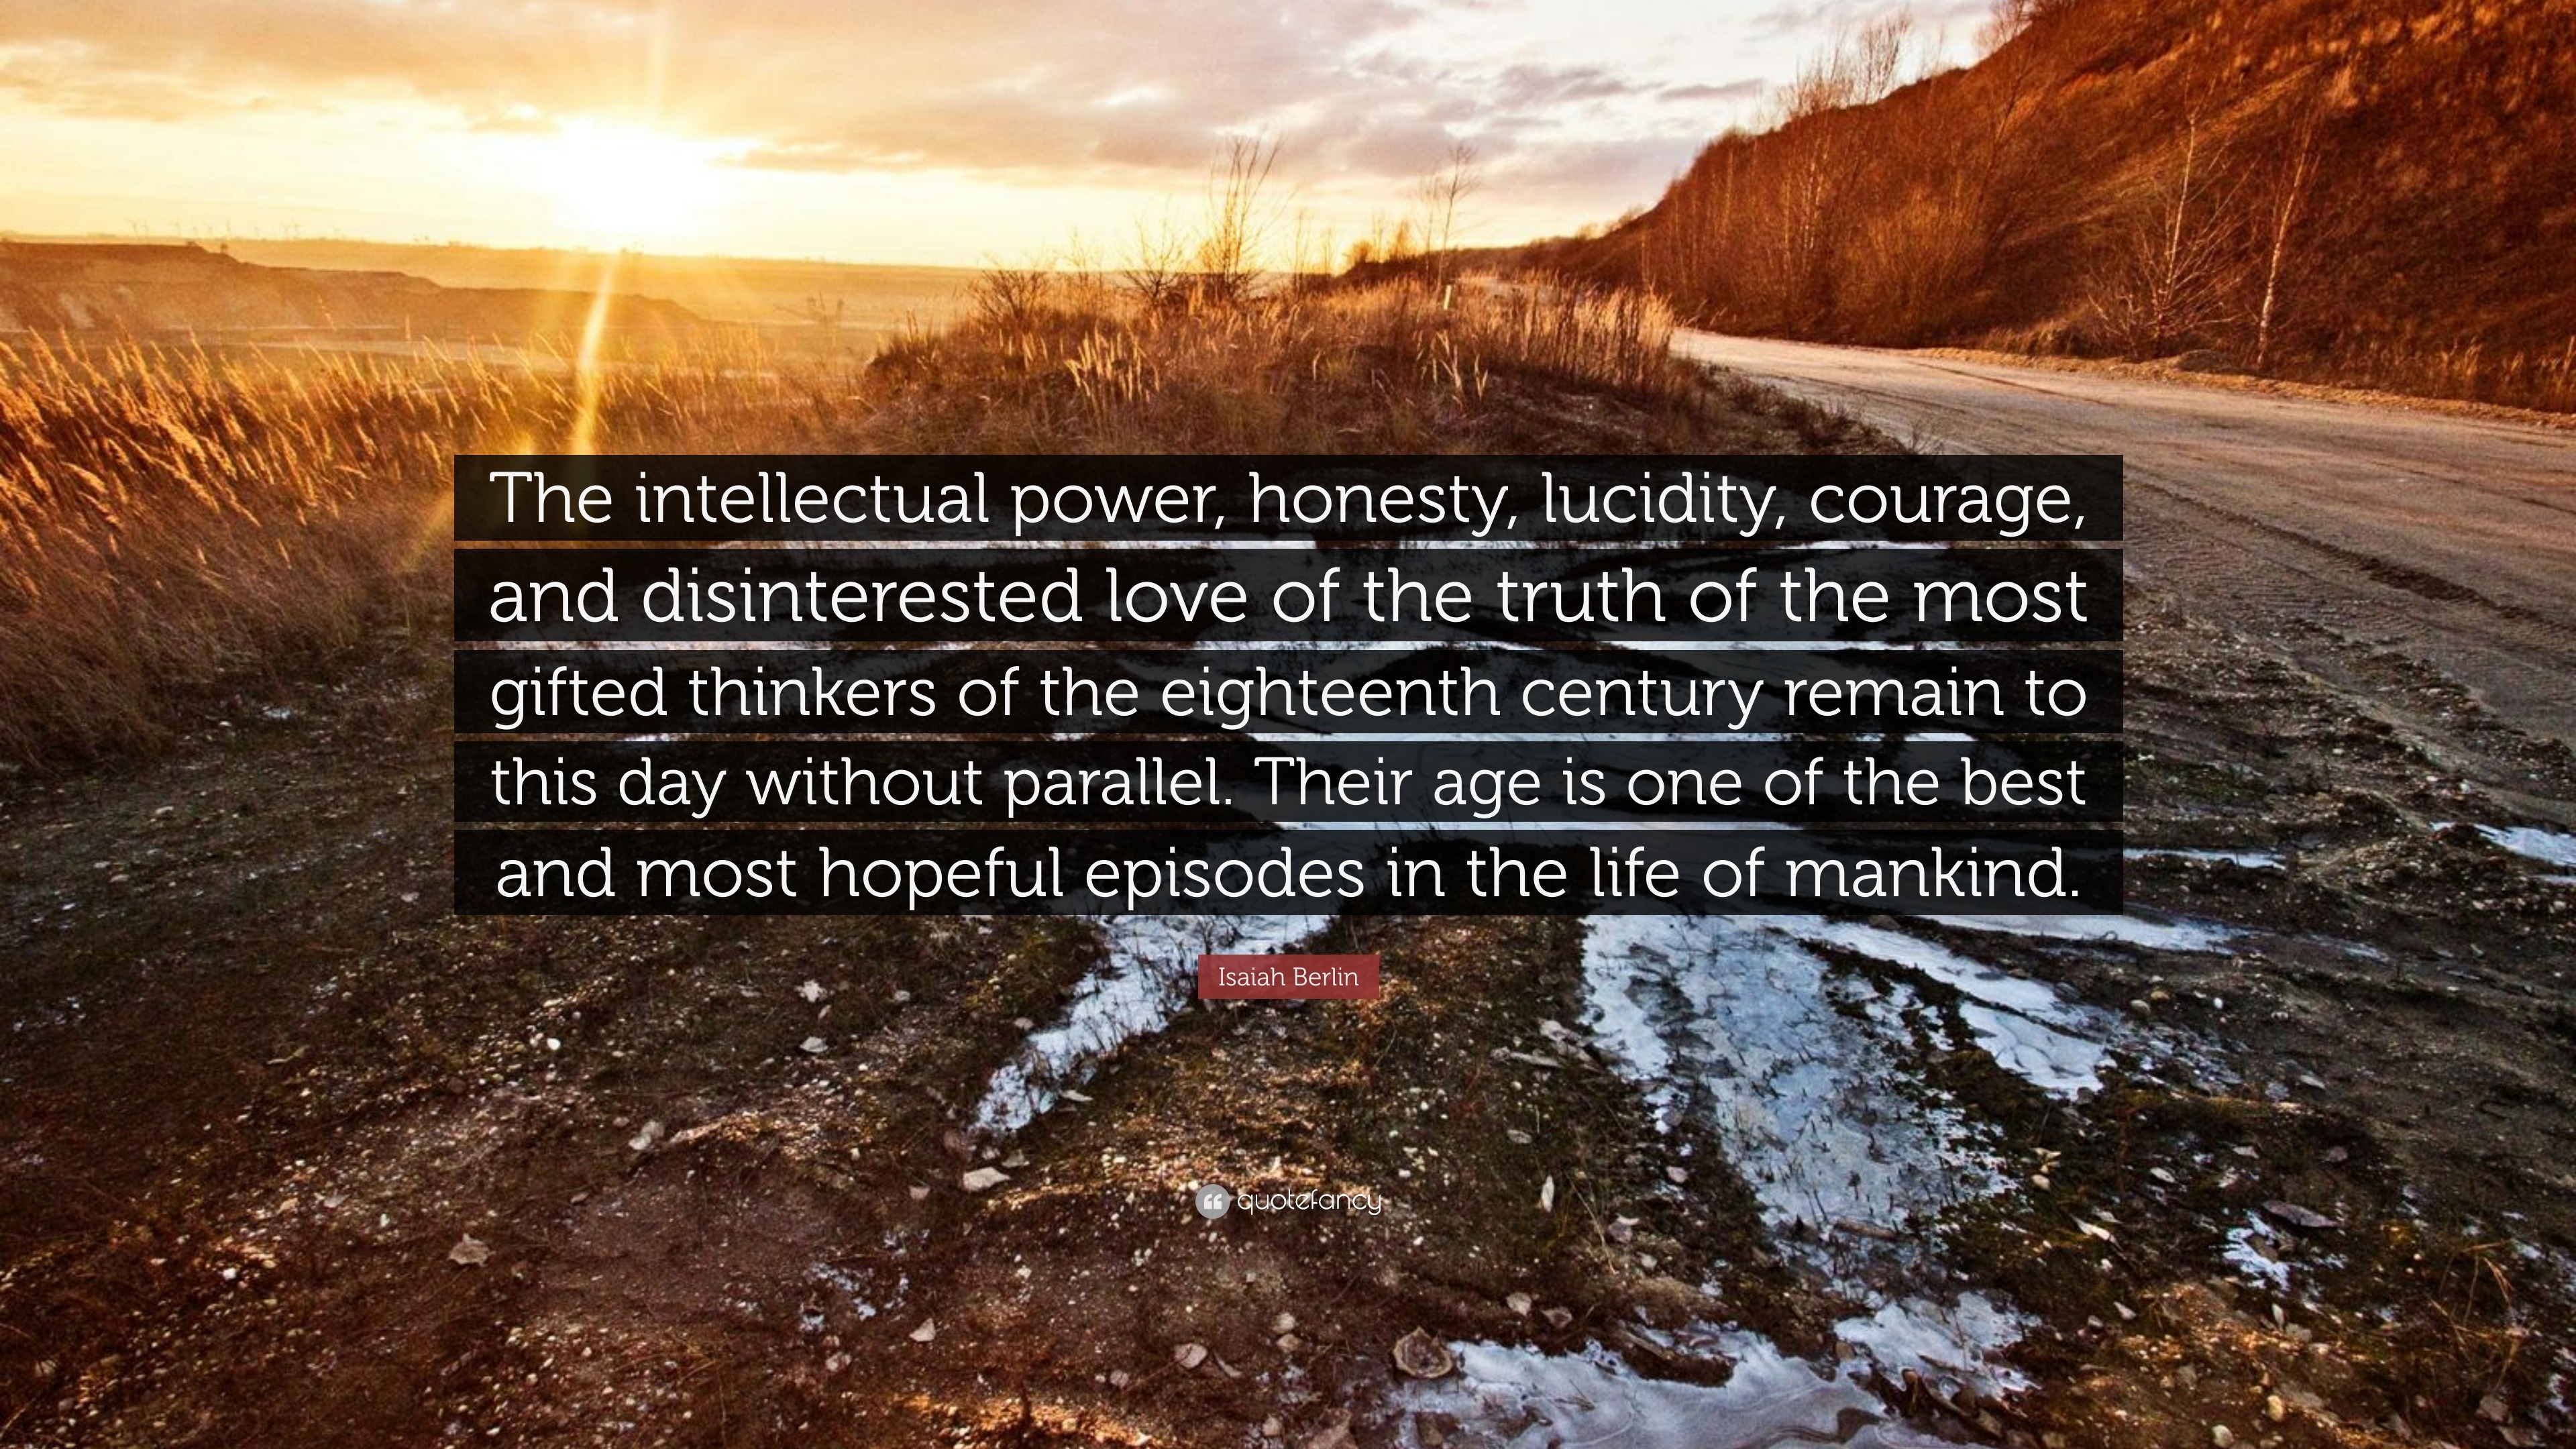 Isaiah Berlin Quote “The intellectual power honesty lucidity courage and